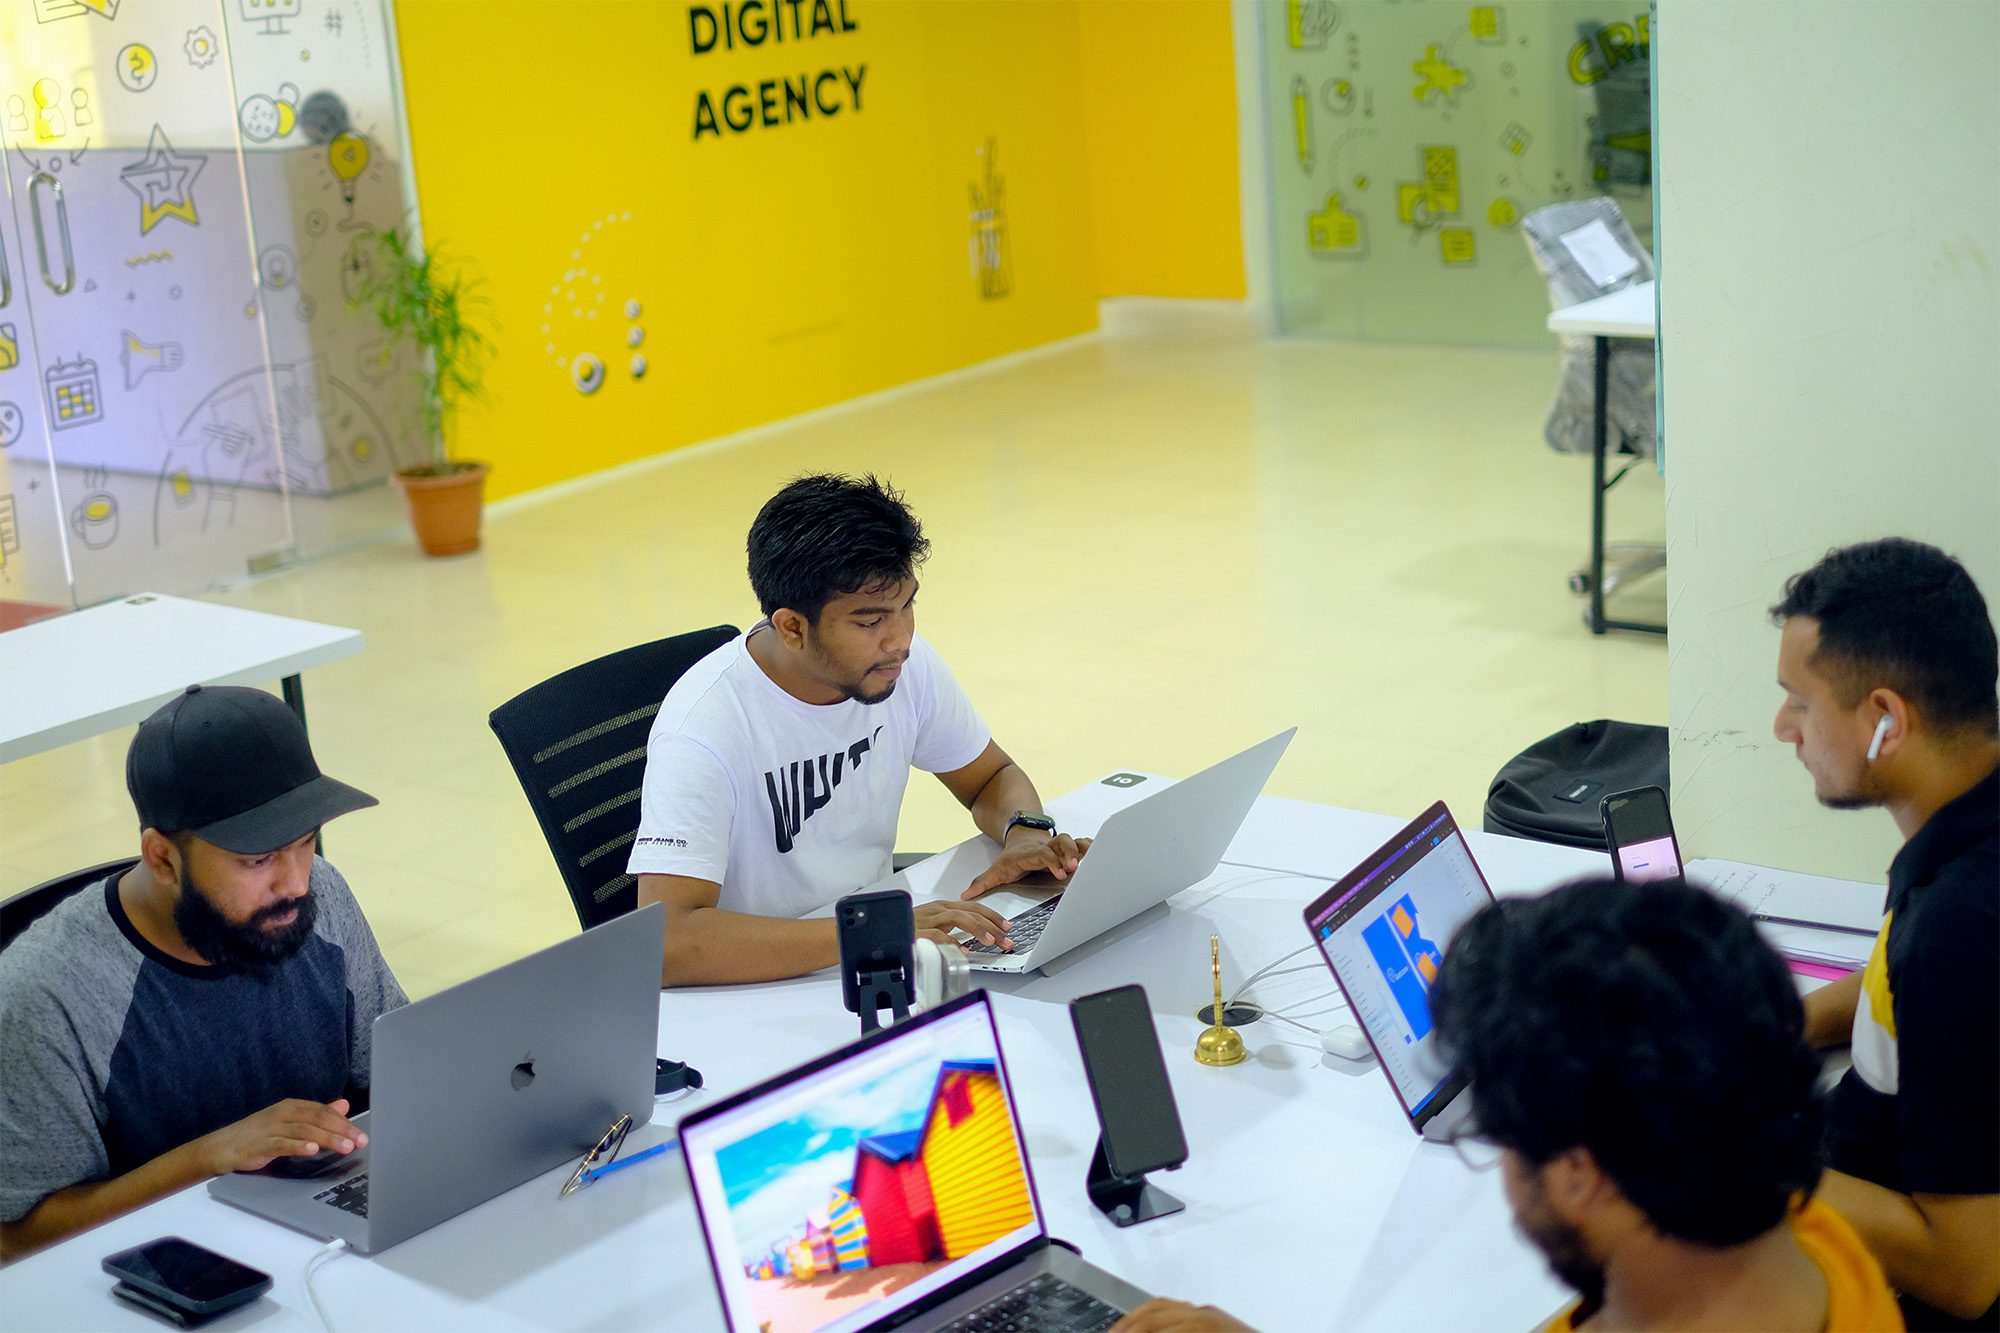 A Complete Guide How Does Digital Agency Work